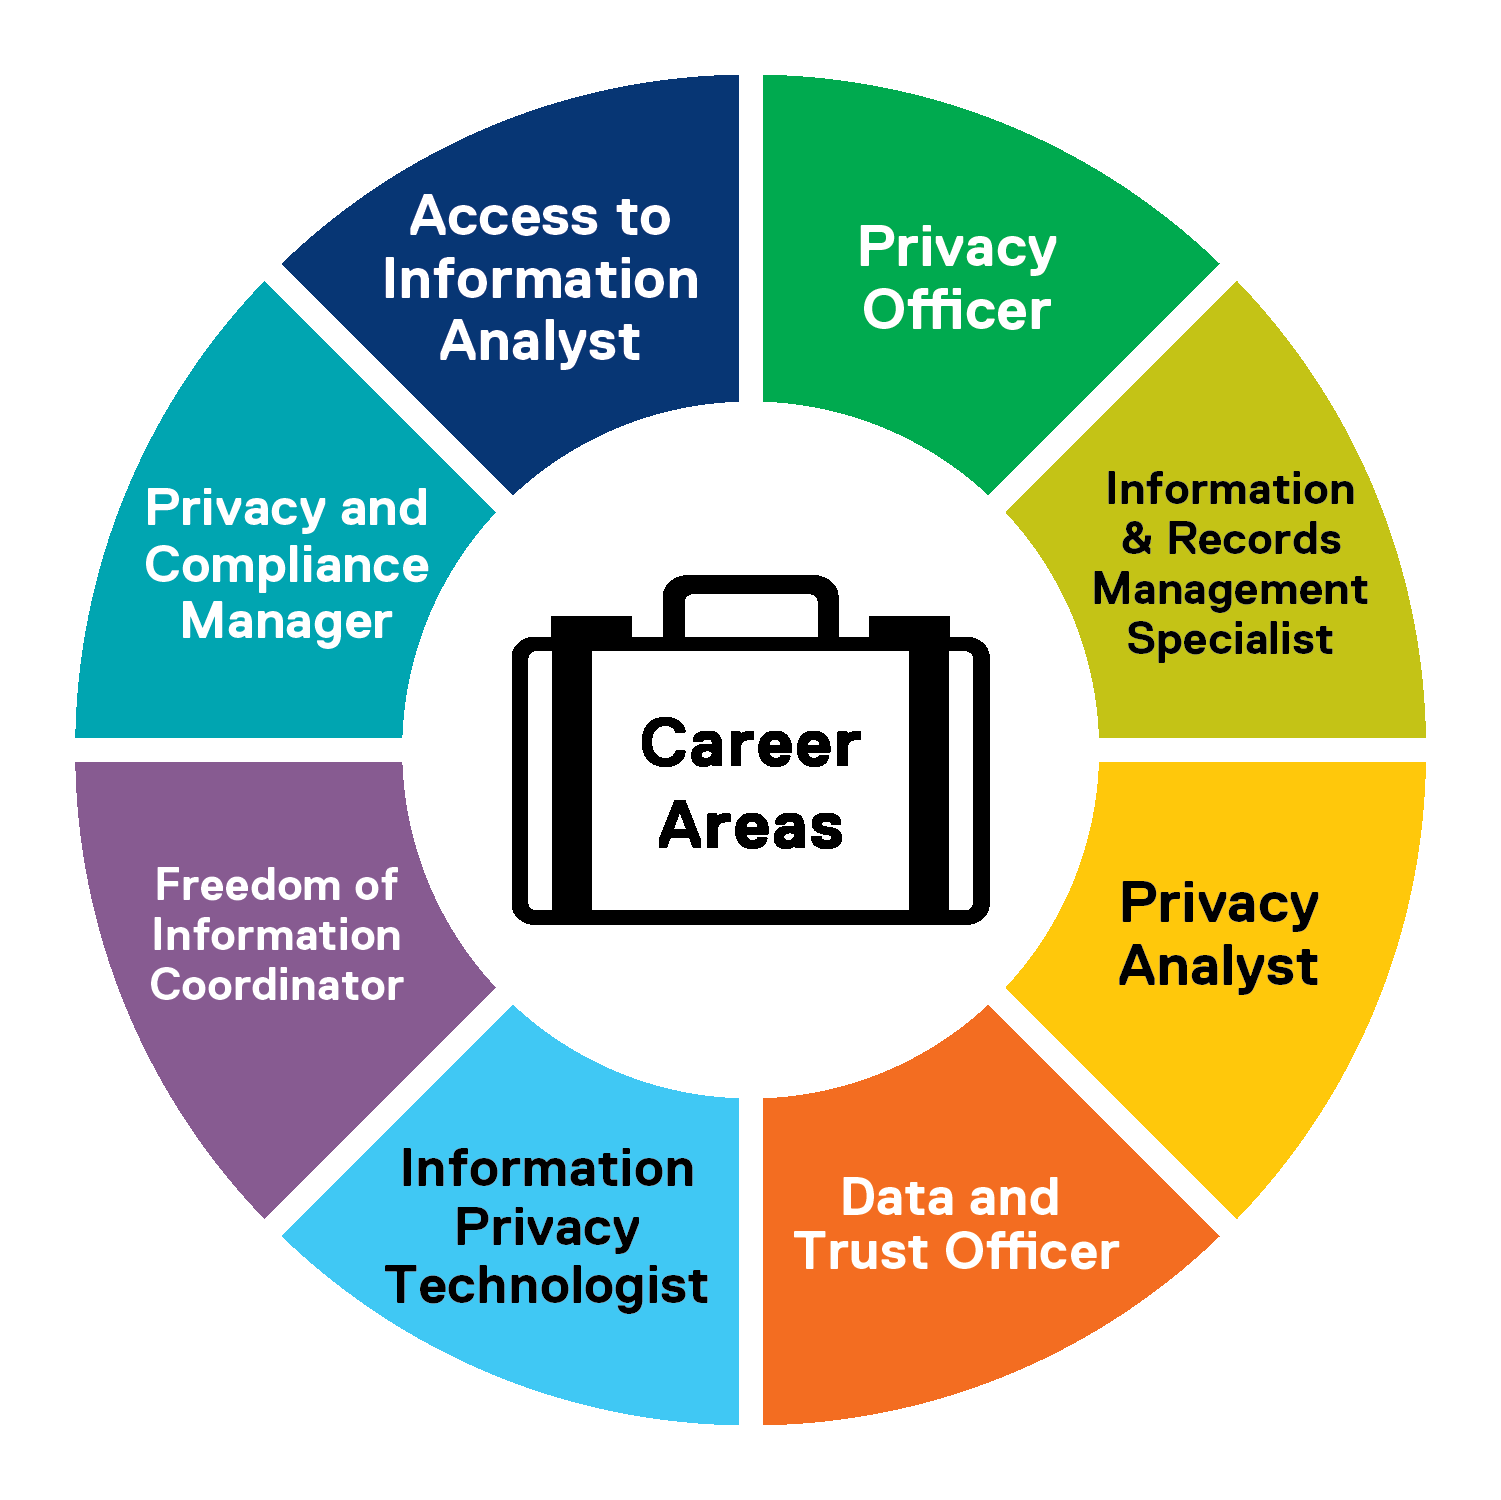 A career wheel showing privacy officer, information & records management specialist, privacy analyst, data and trust officer, information privacy technologist, freedom of information coordinator, privacy and compliance manager, and access to information analyst